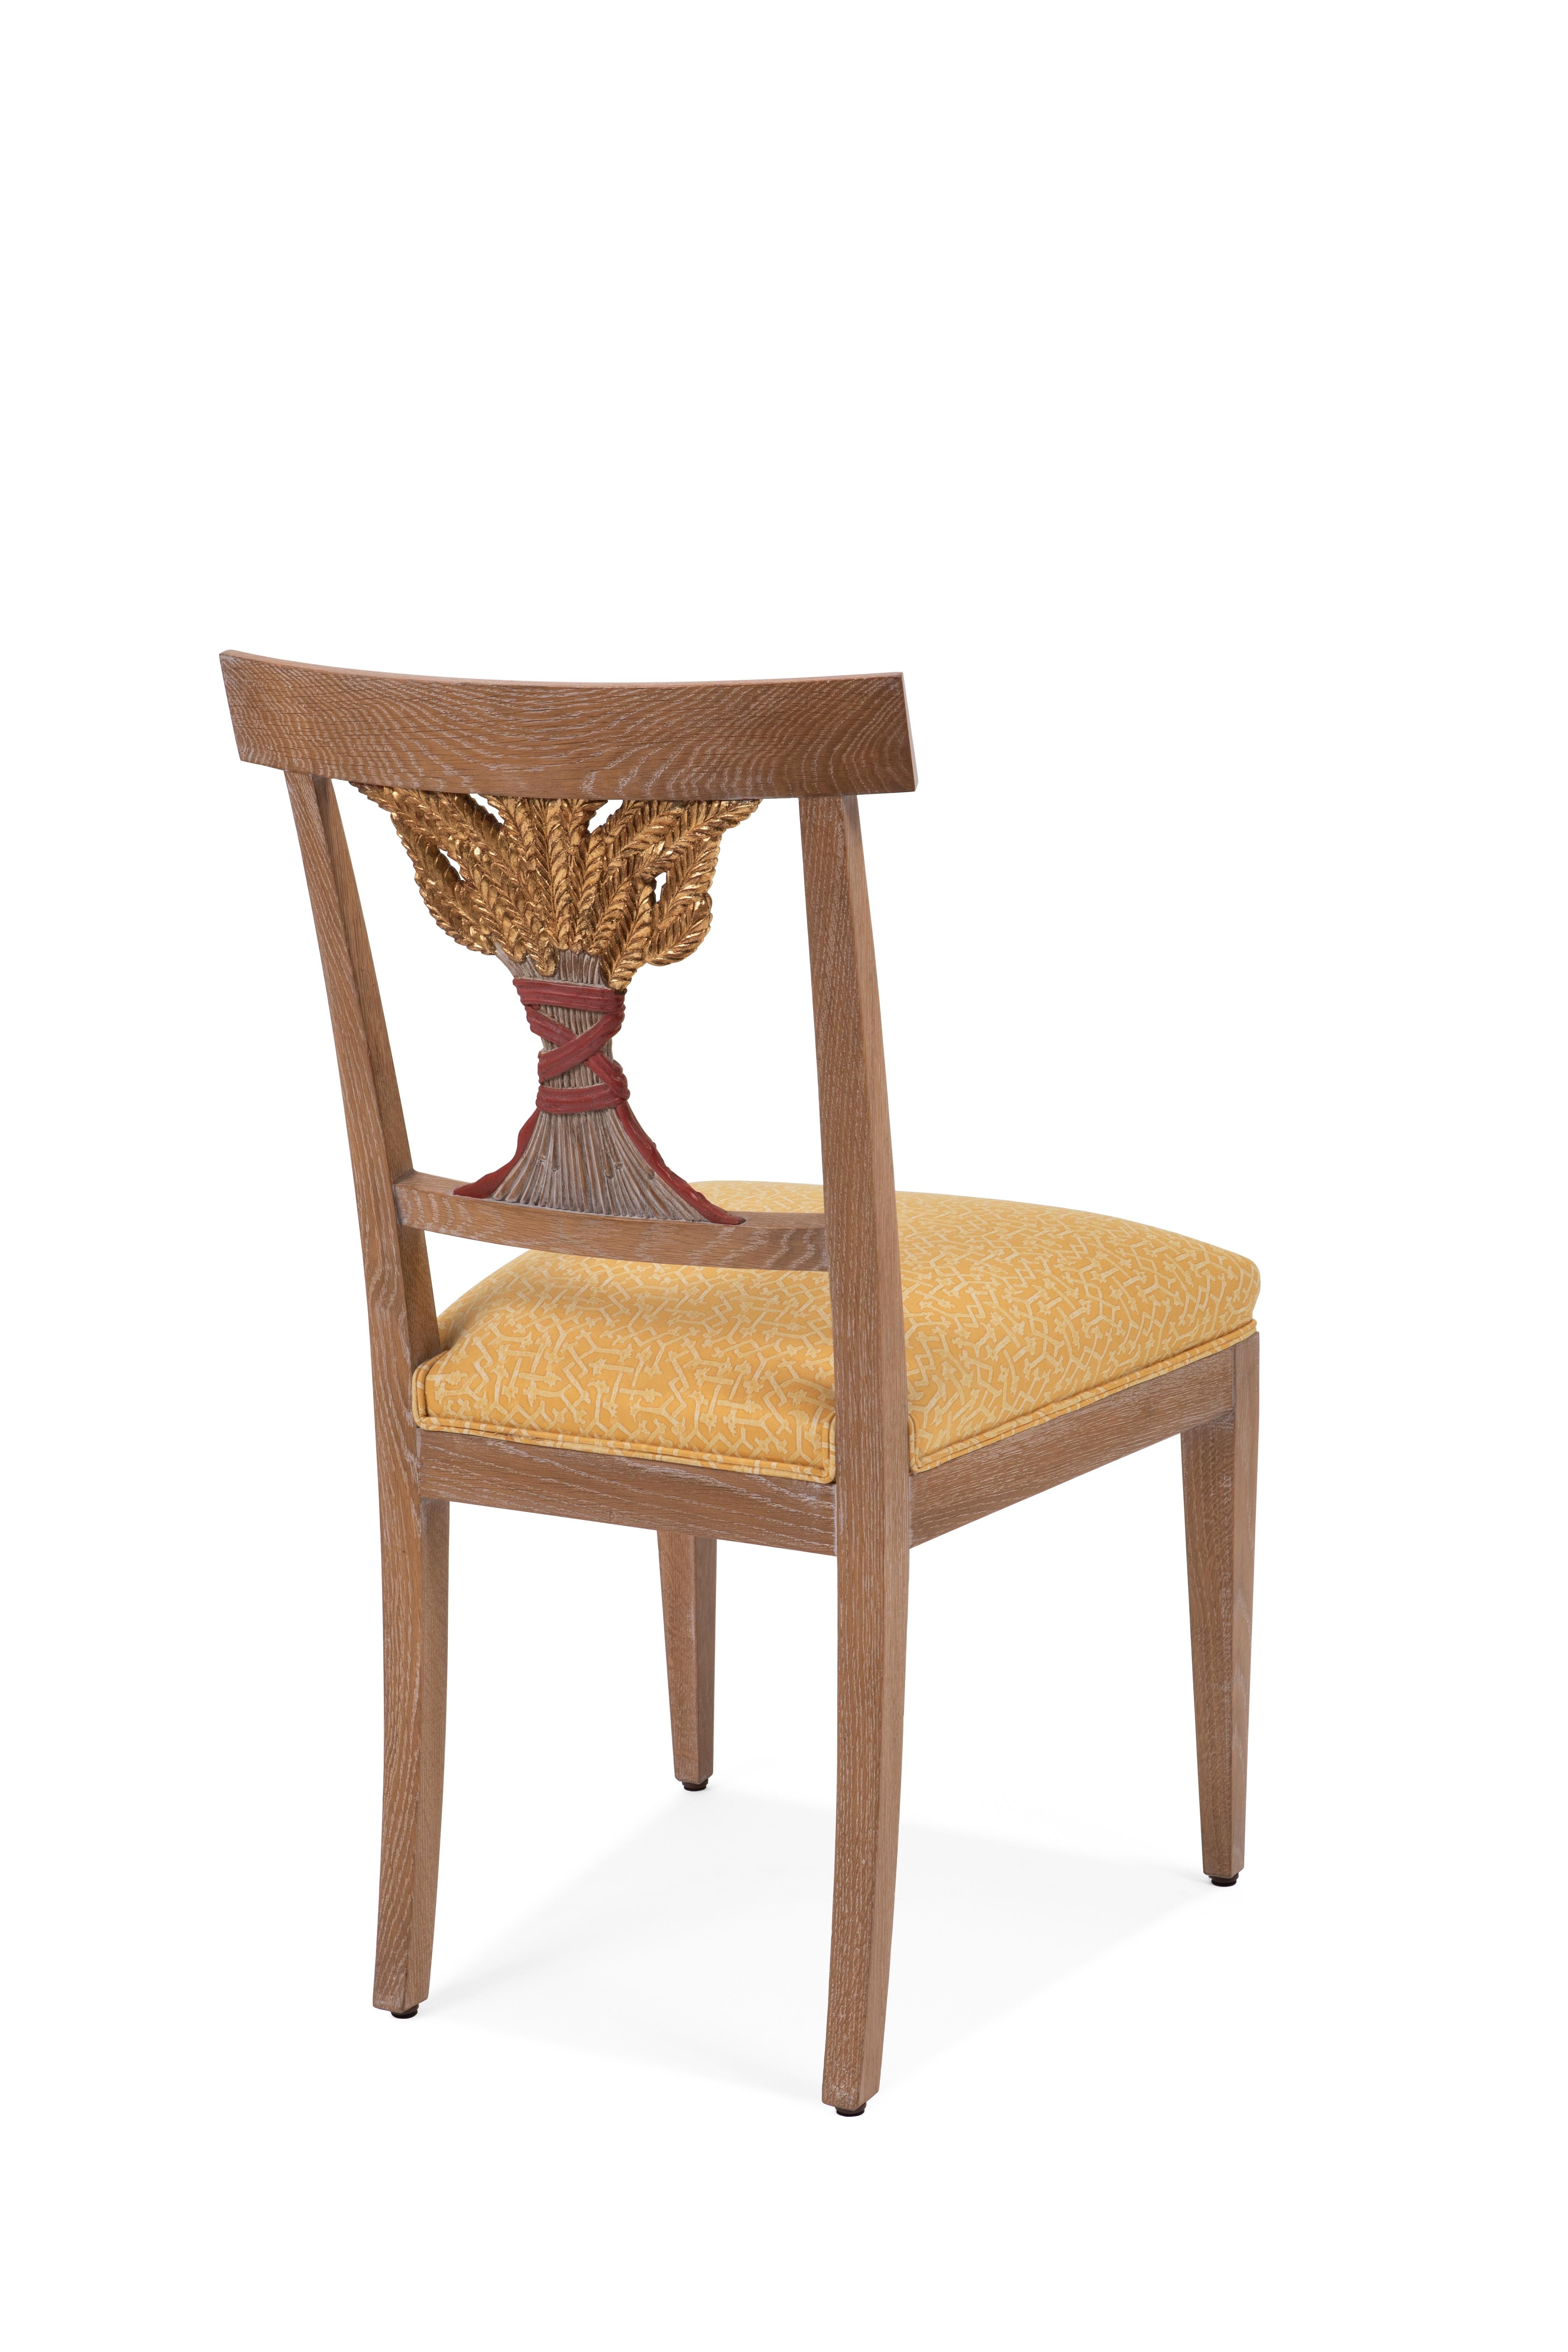 Polished Oak Dining Chair with Decorative Ears of Wheat Hand Carved, Made in Italy For Sale